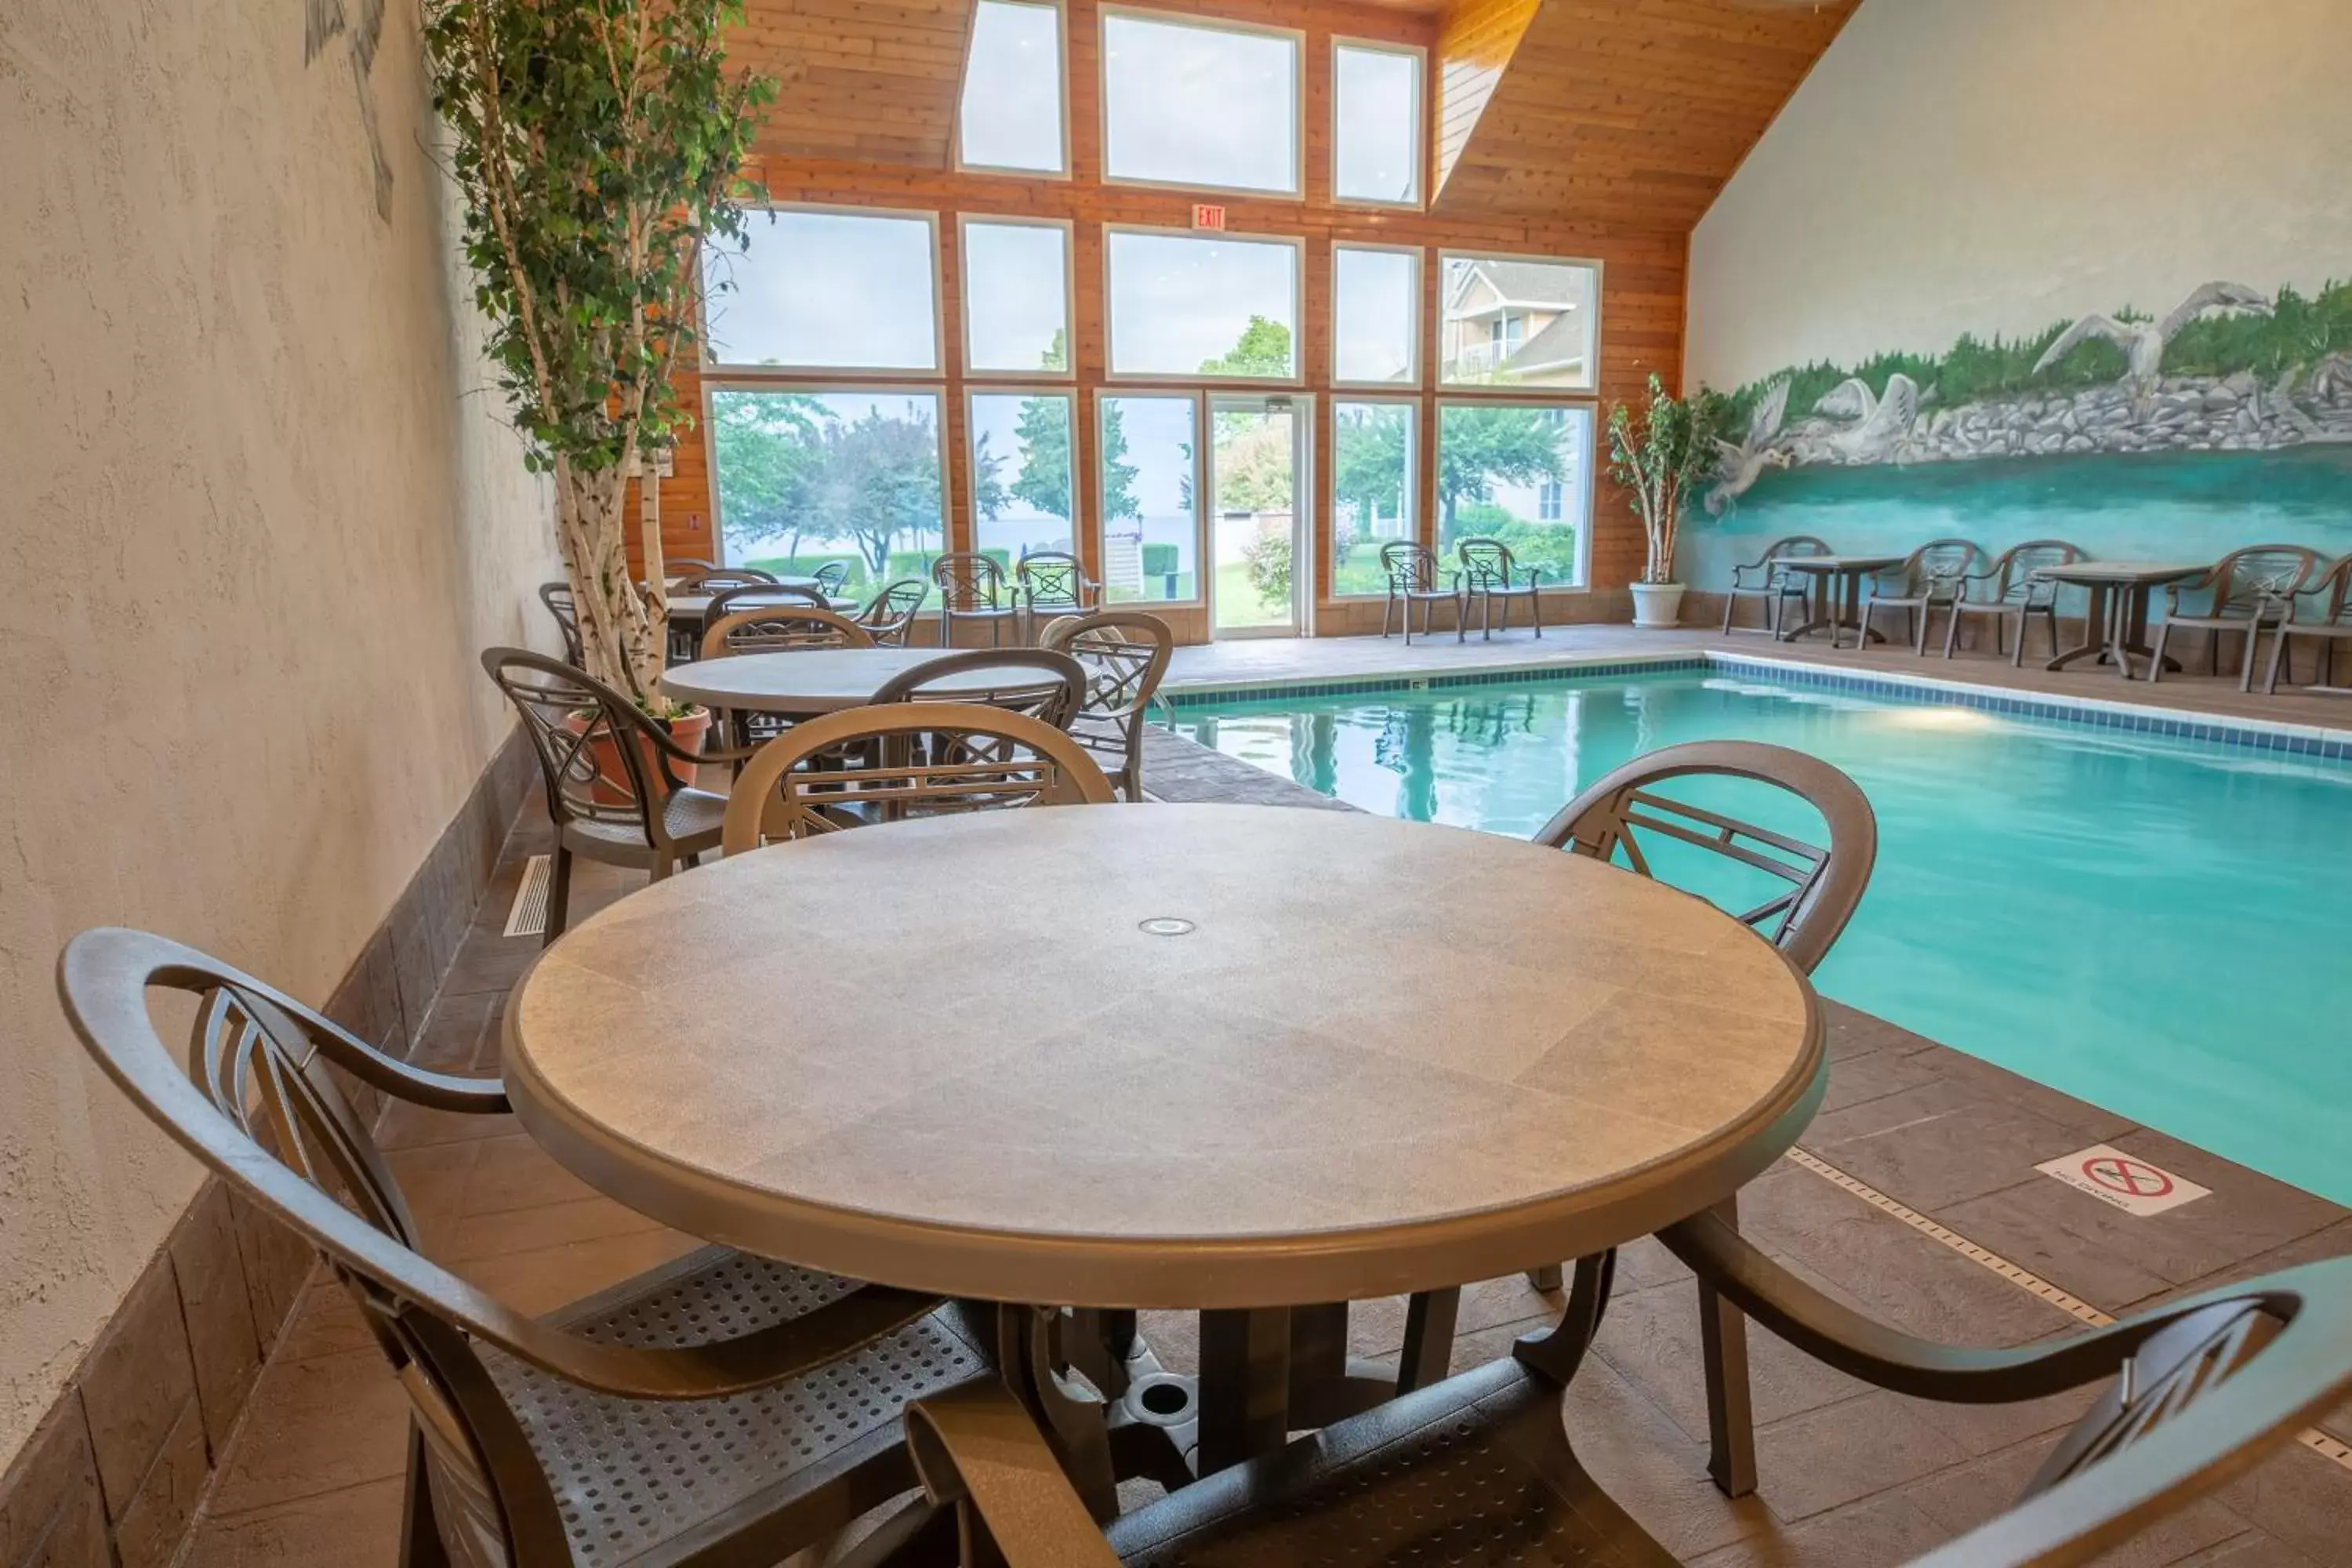 Swimming pool in Westwood Shores Waterfront Resort